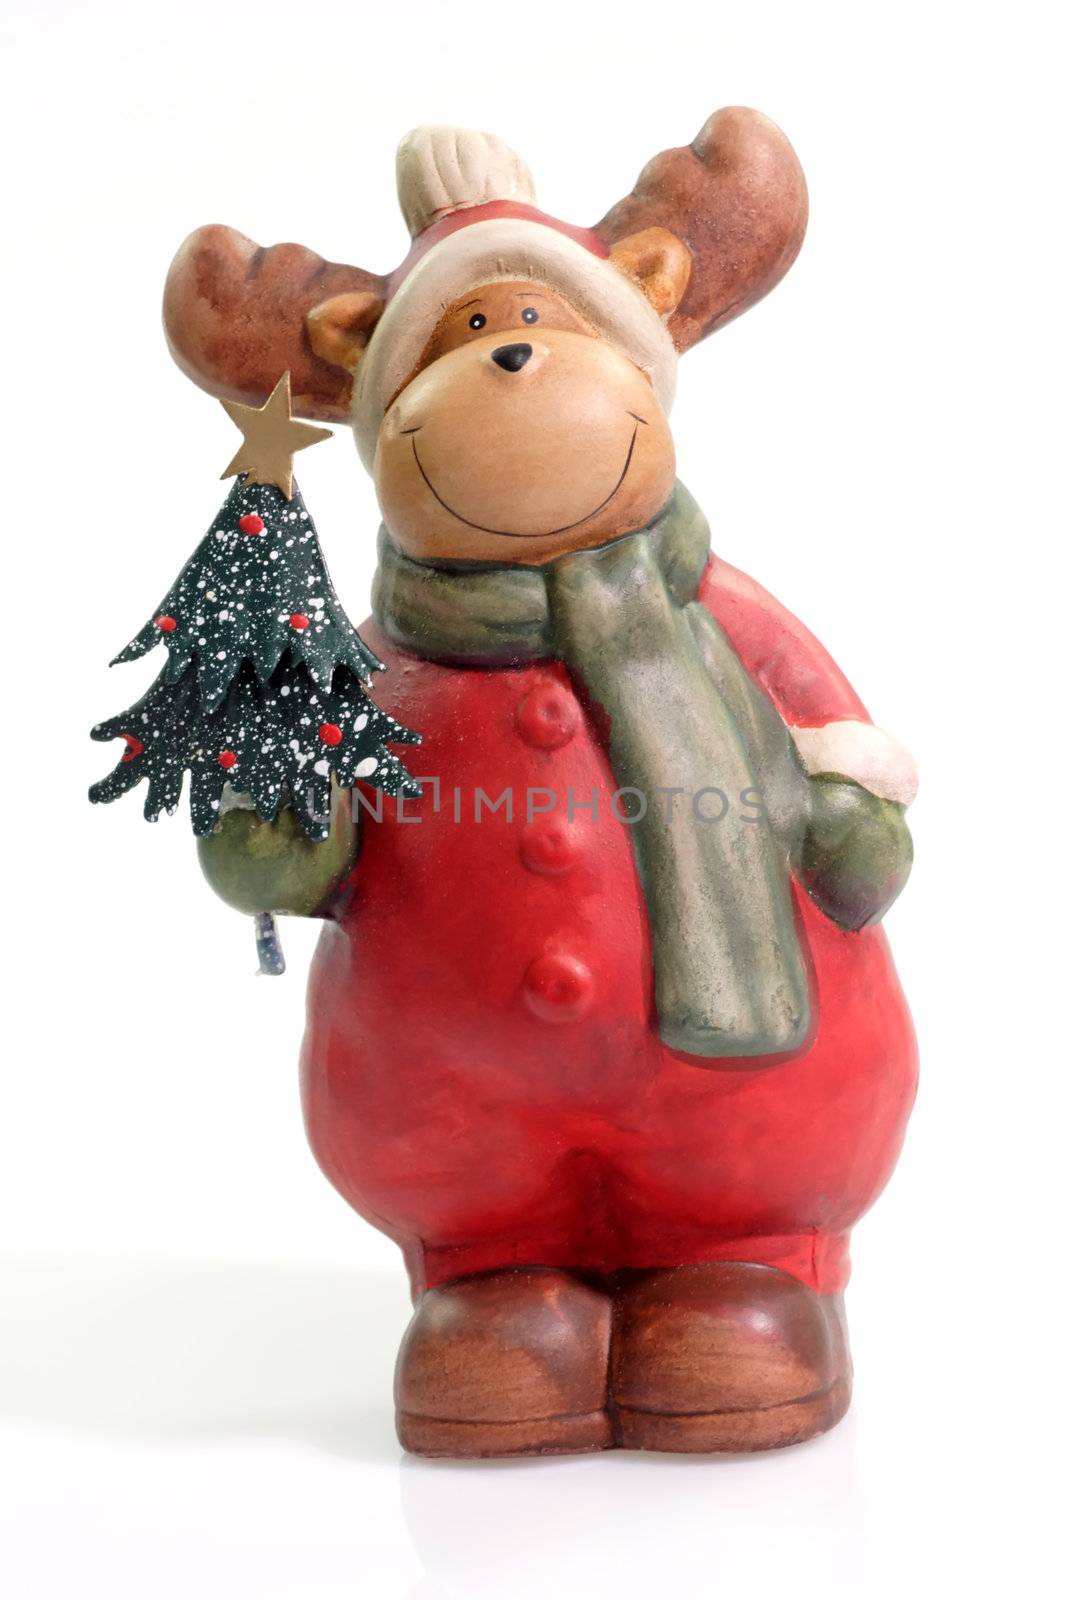 Figurine of a reindeer on bright background